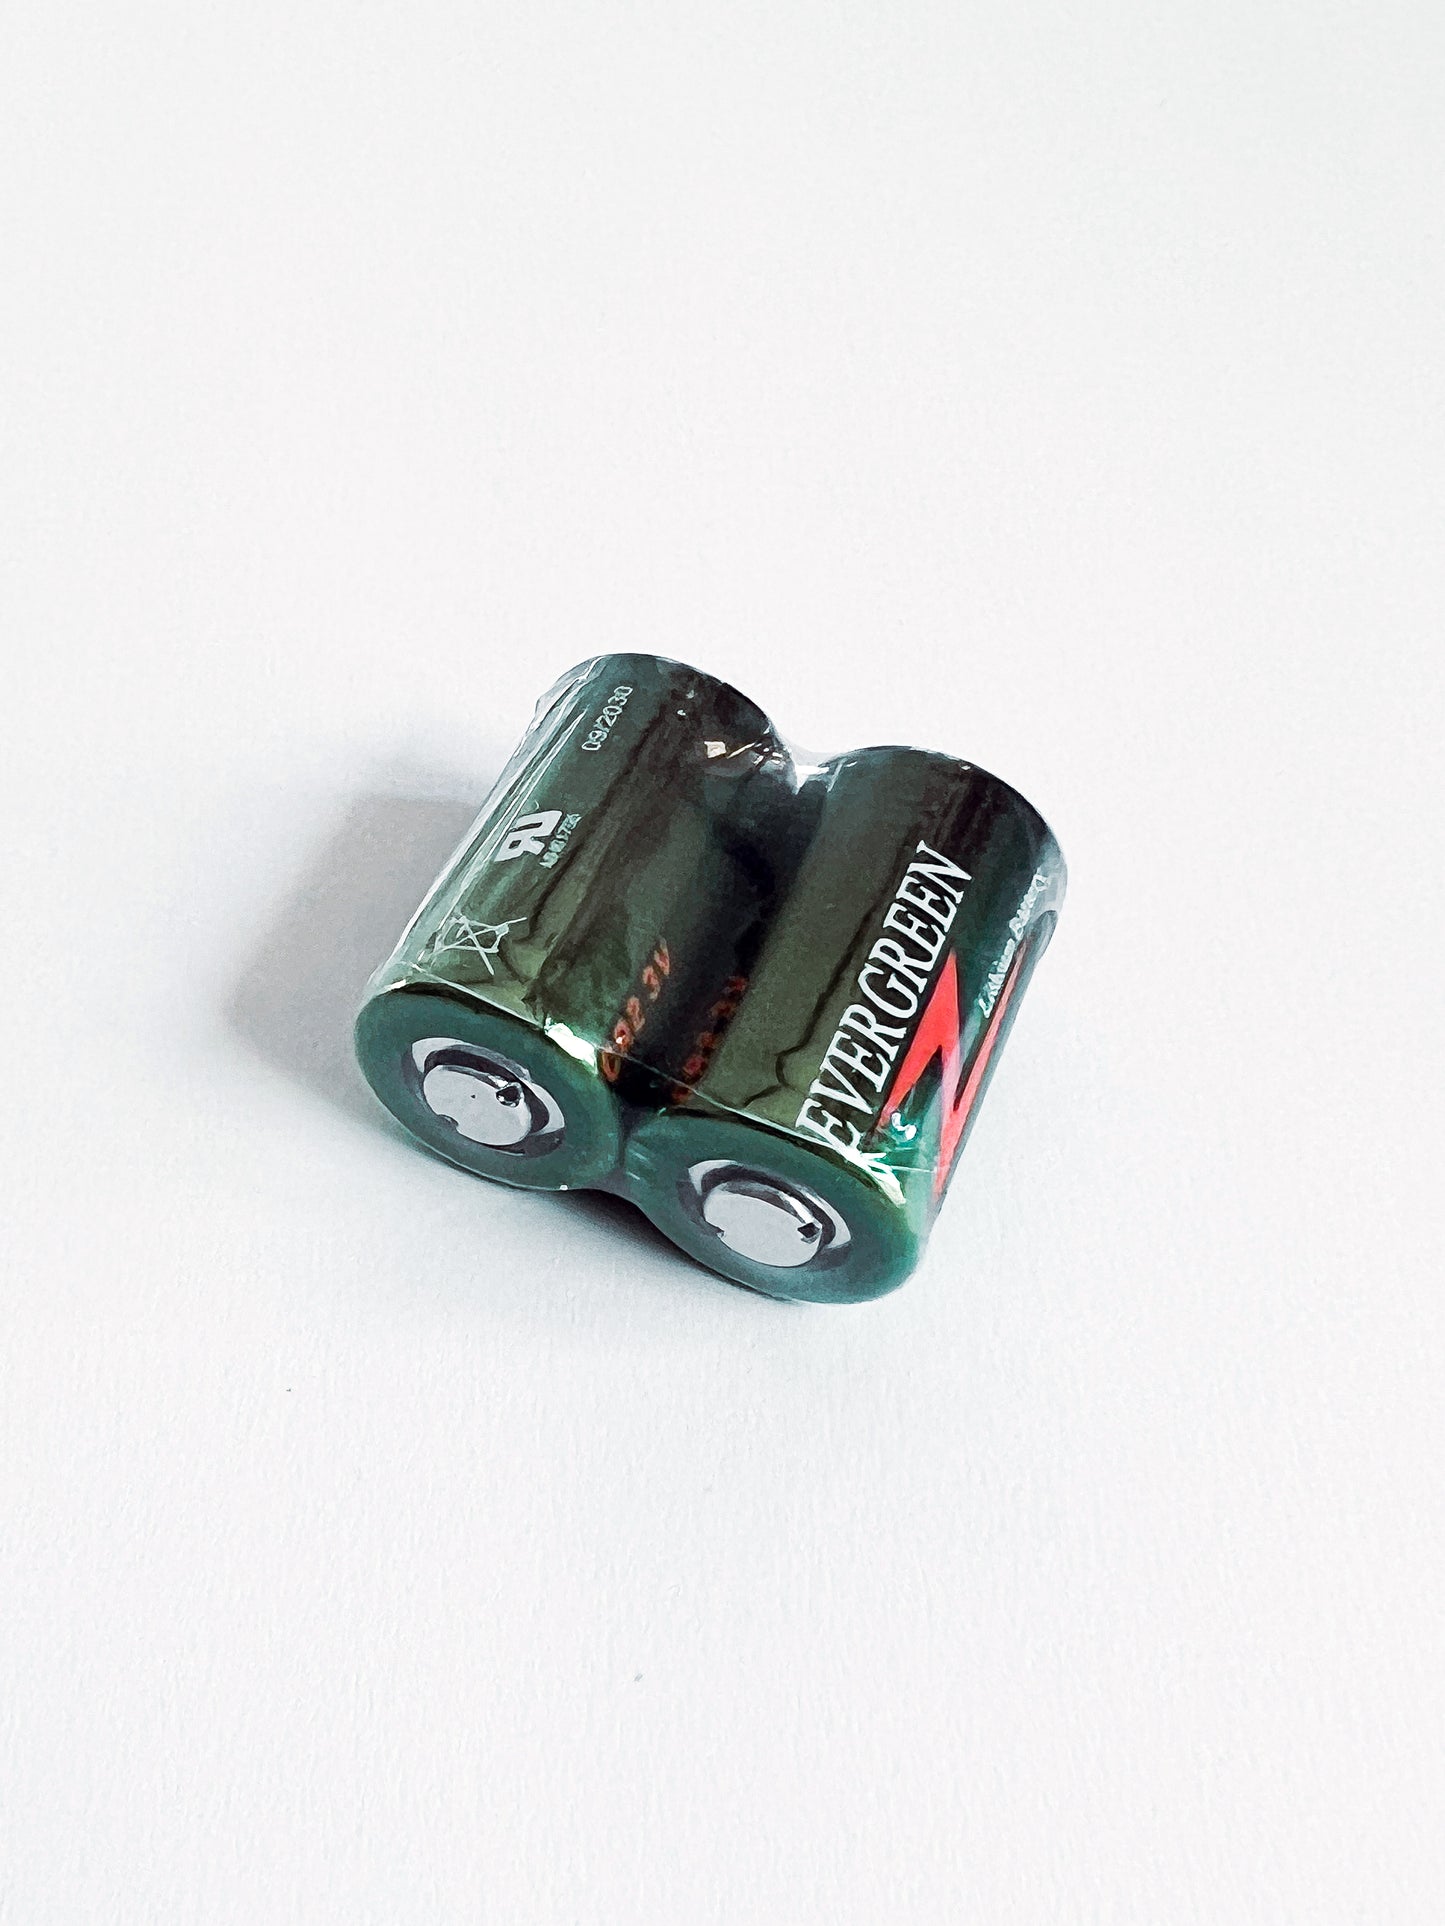 CR2 Batteries - Pack of 2